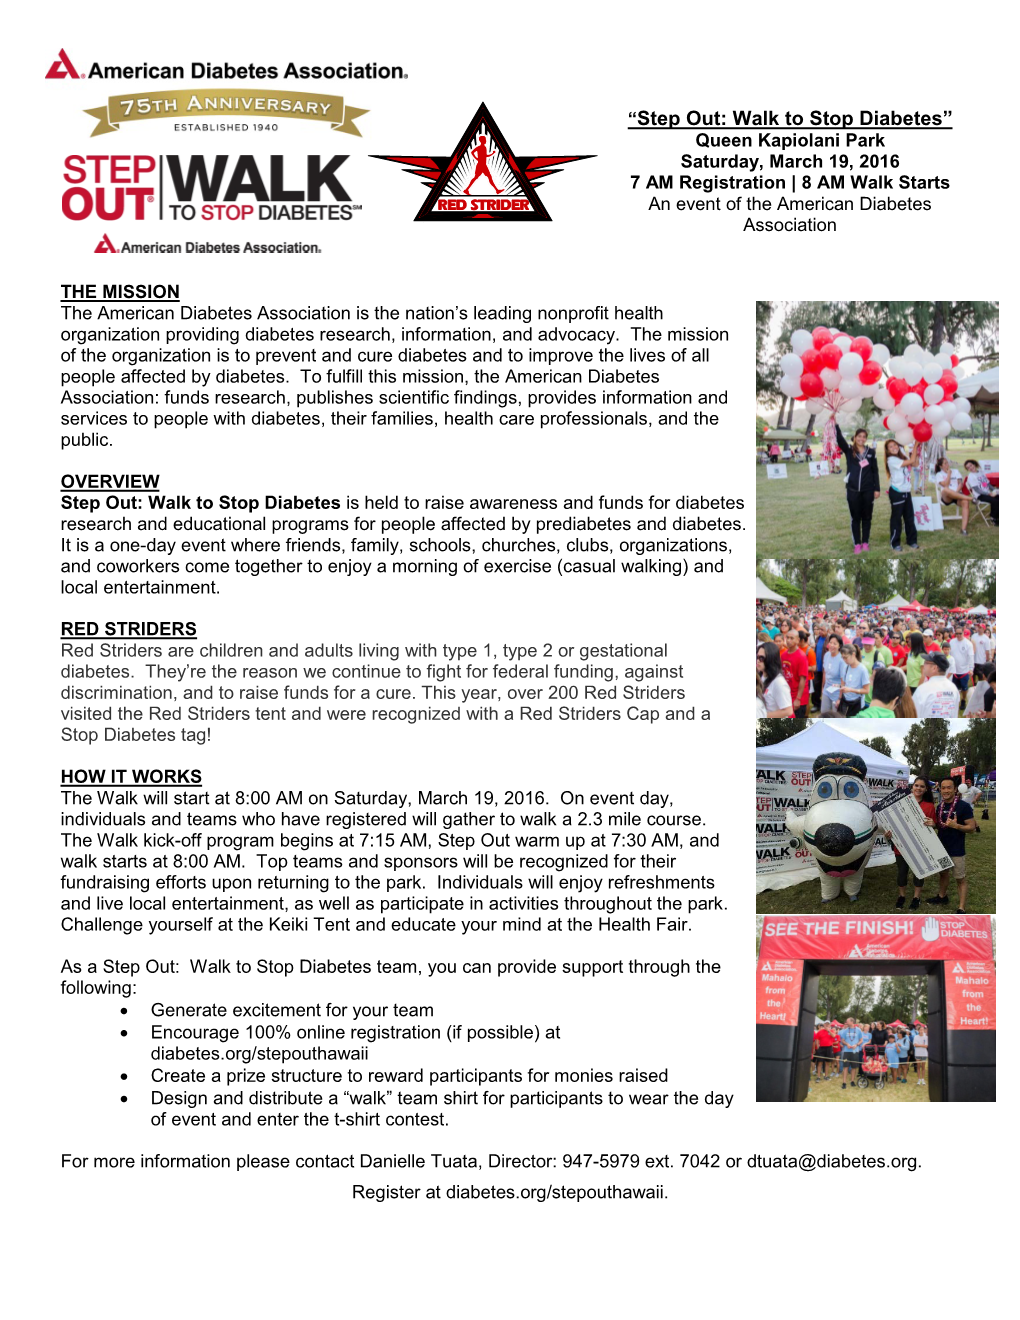 Step out Walk to Stop Diabetes